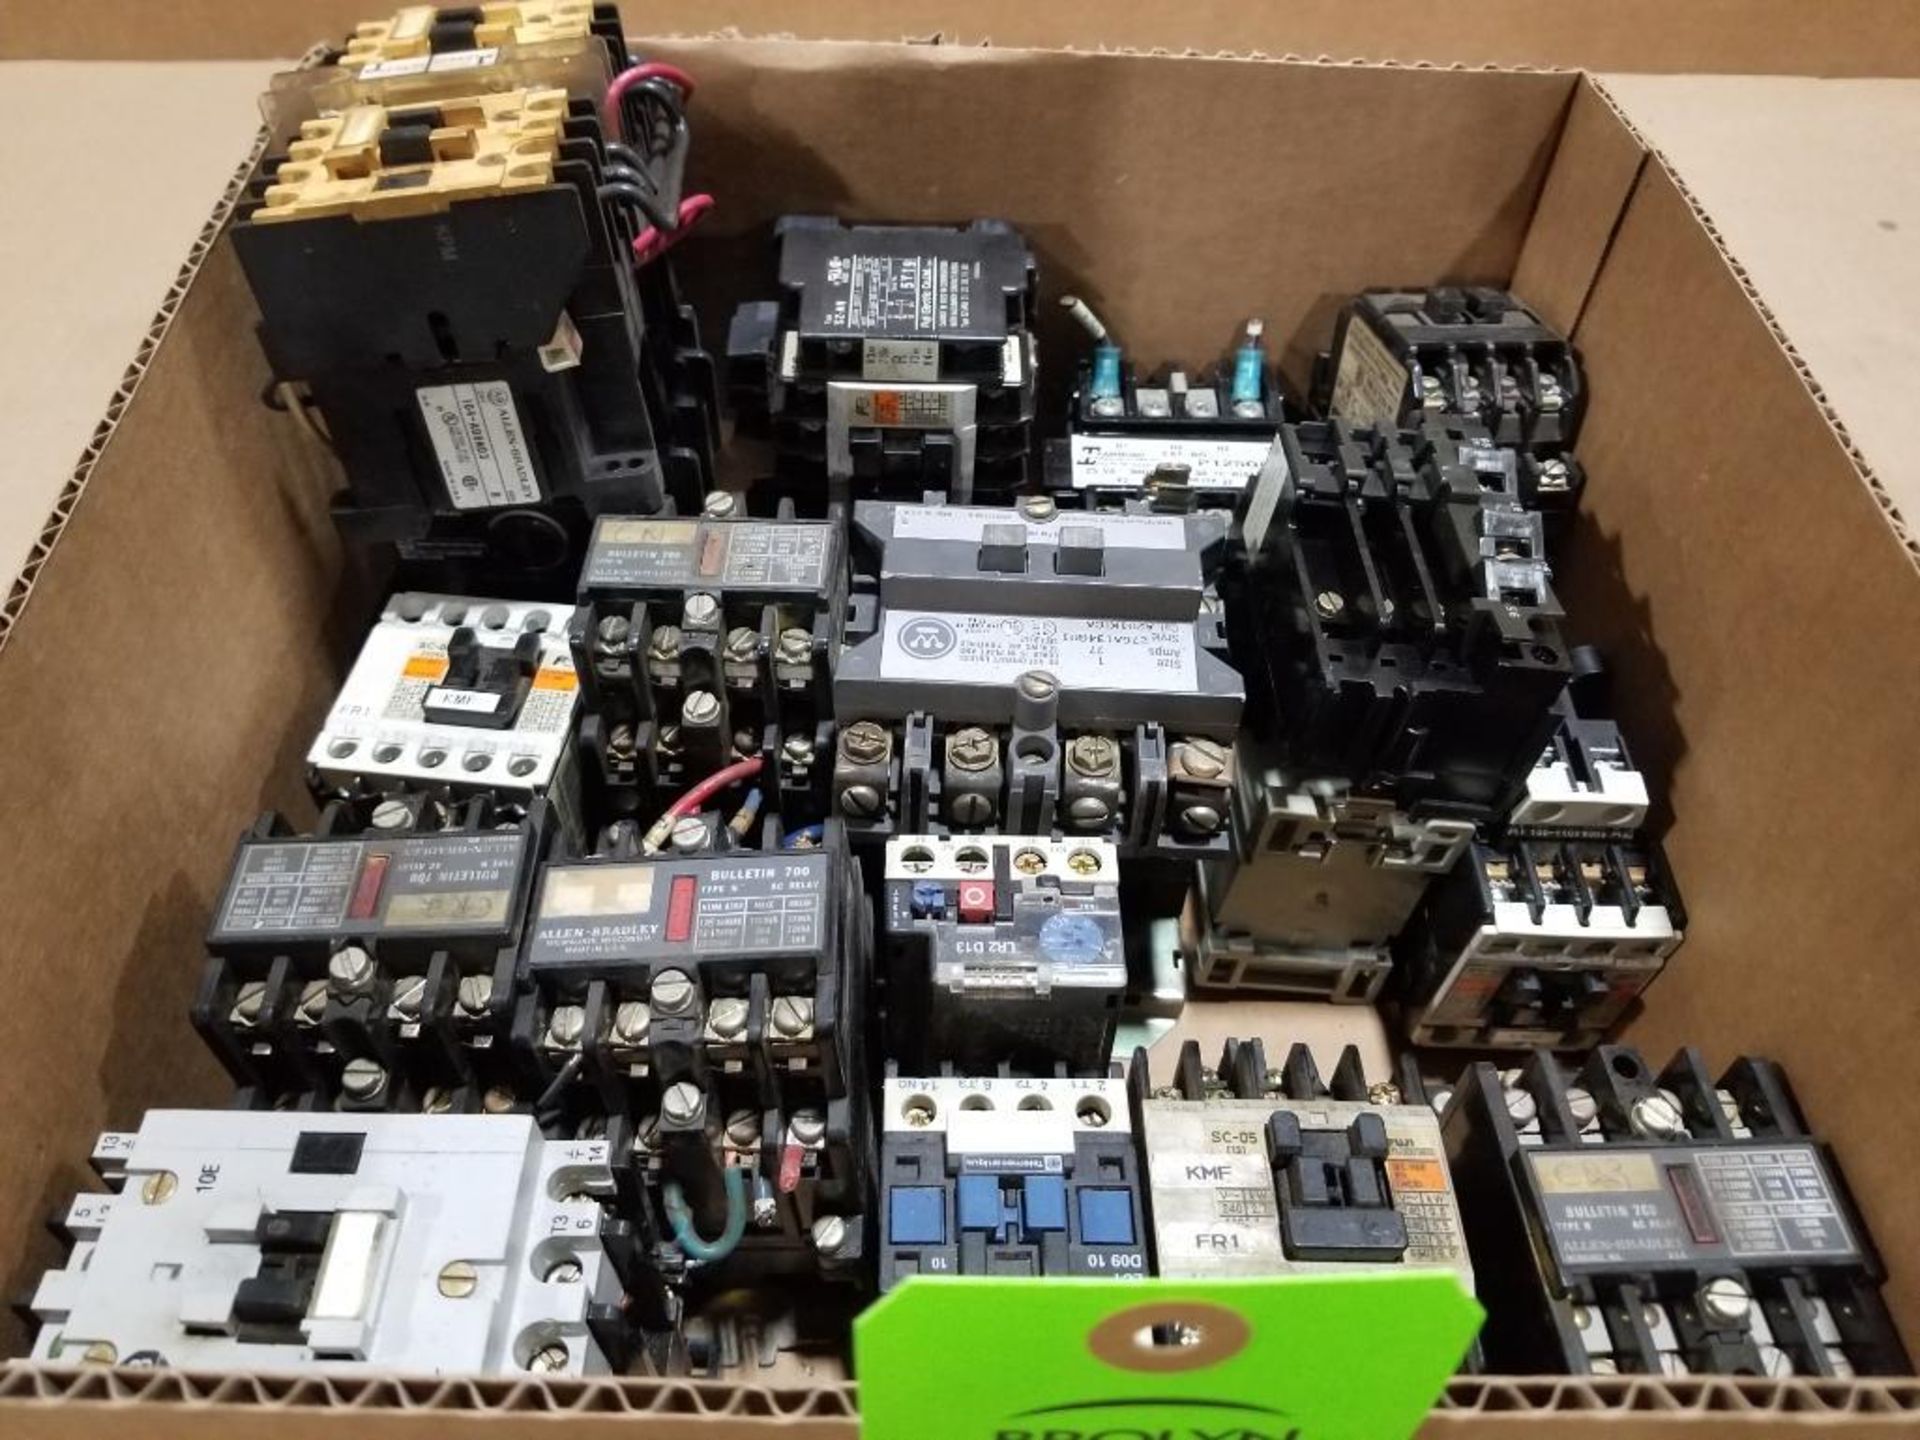 Large assortment of electrical and controls.